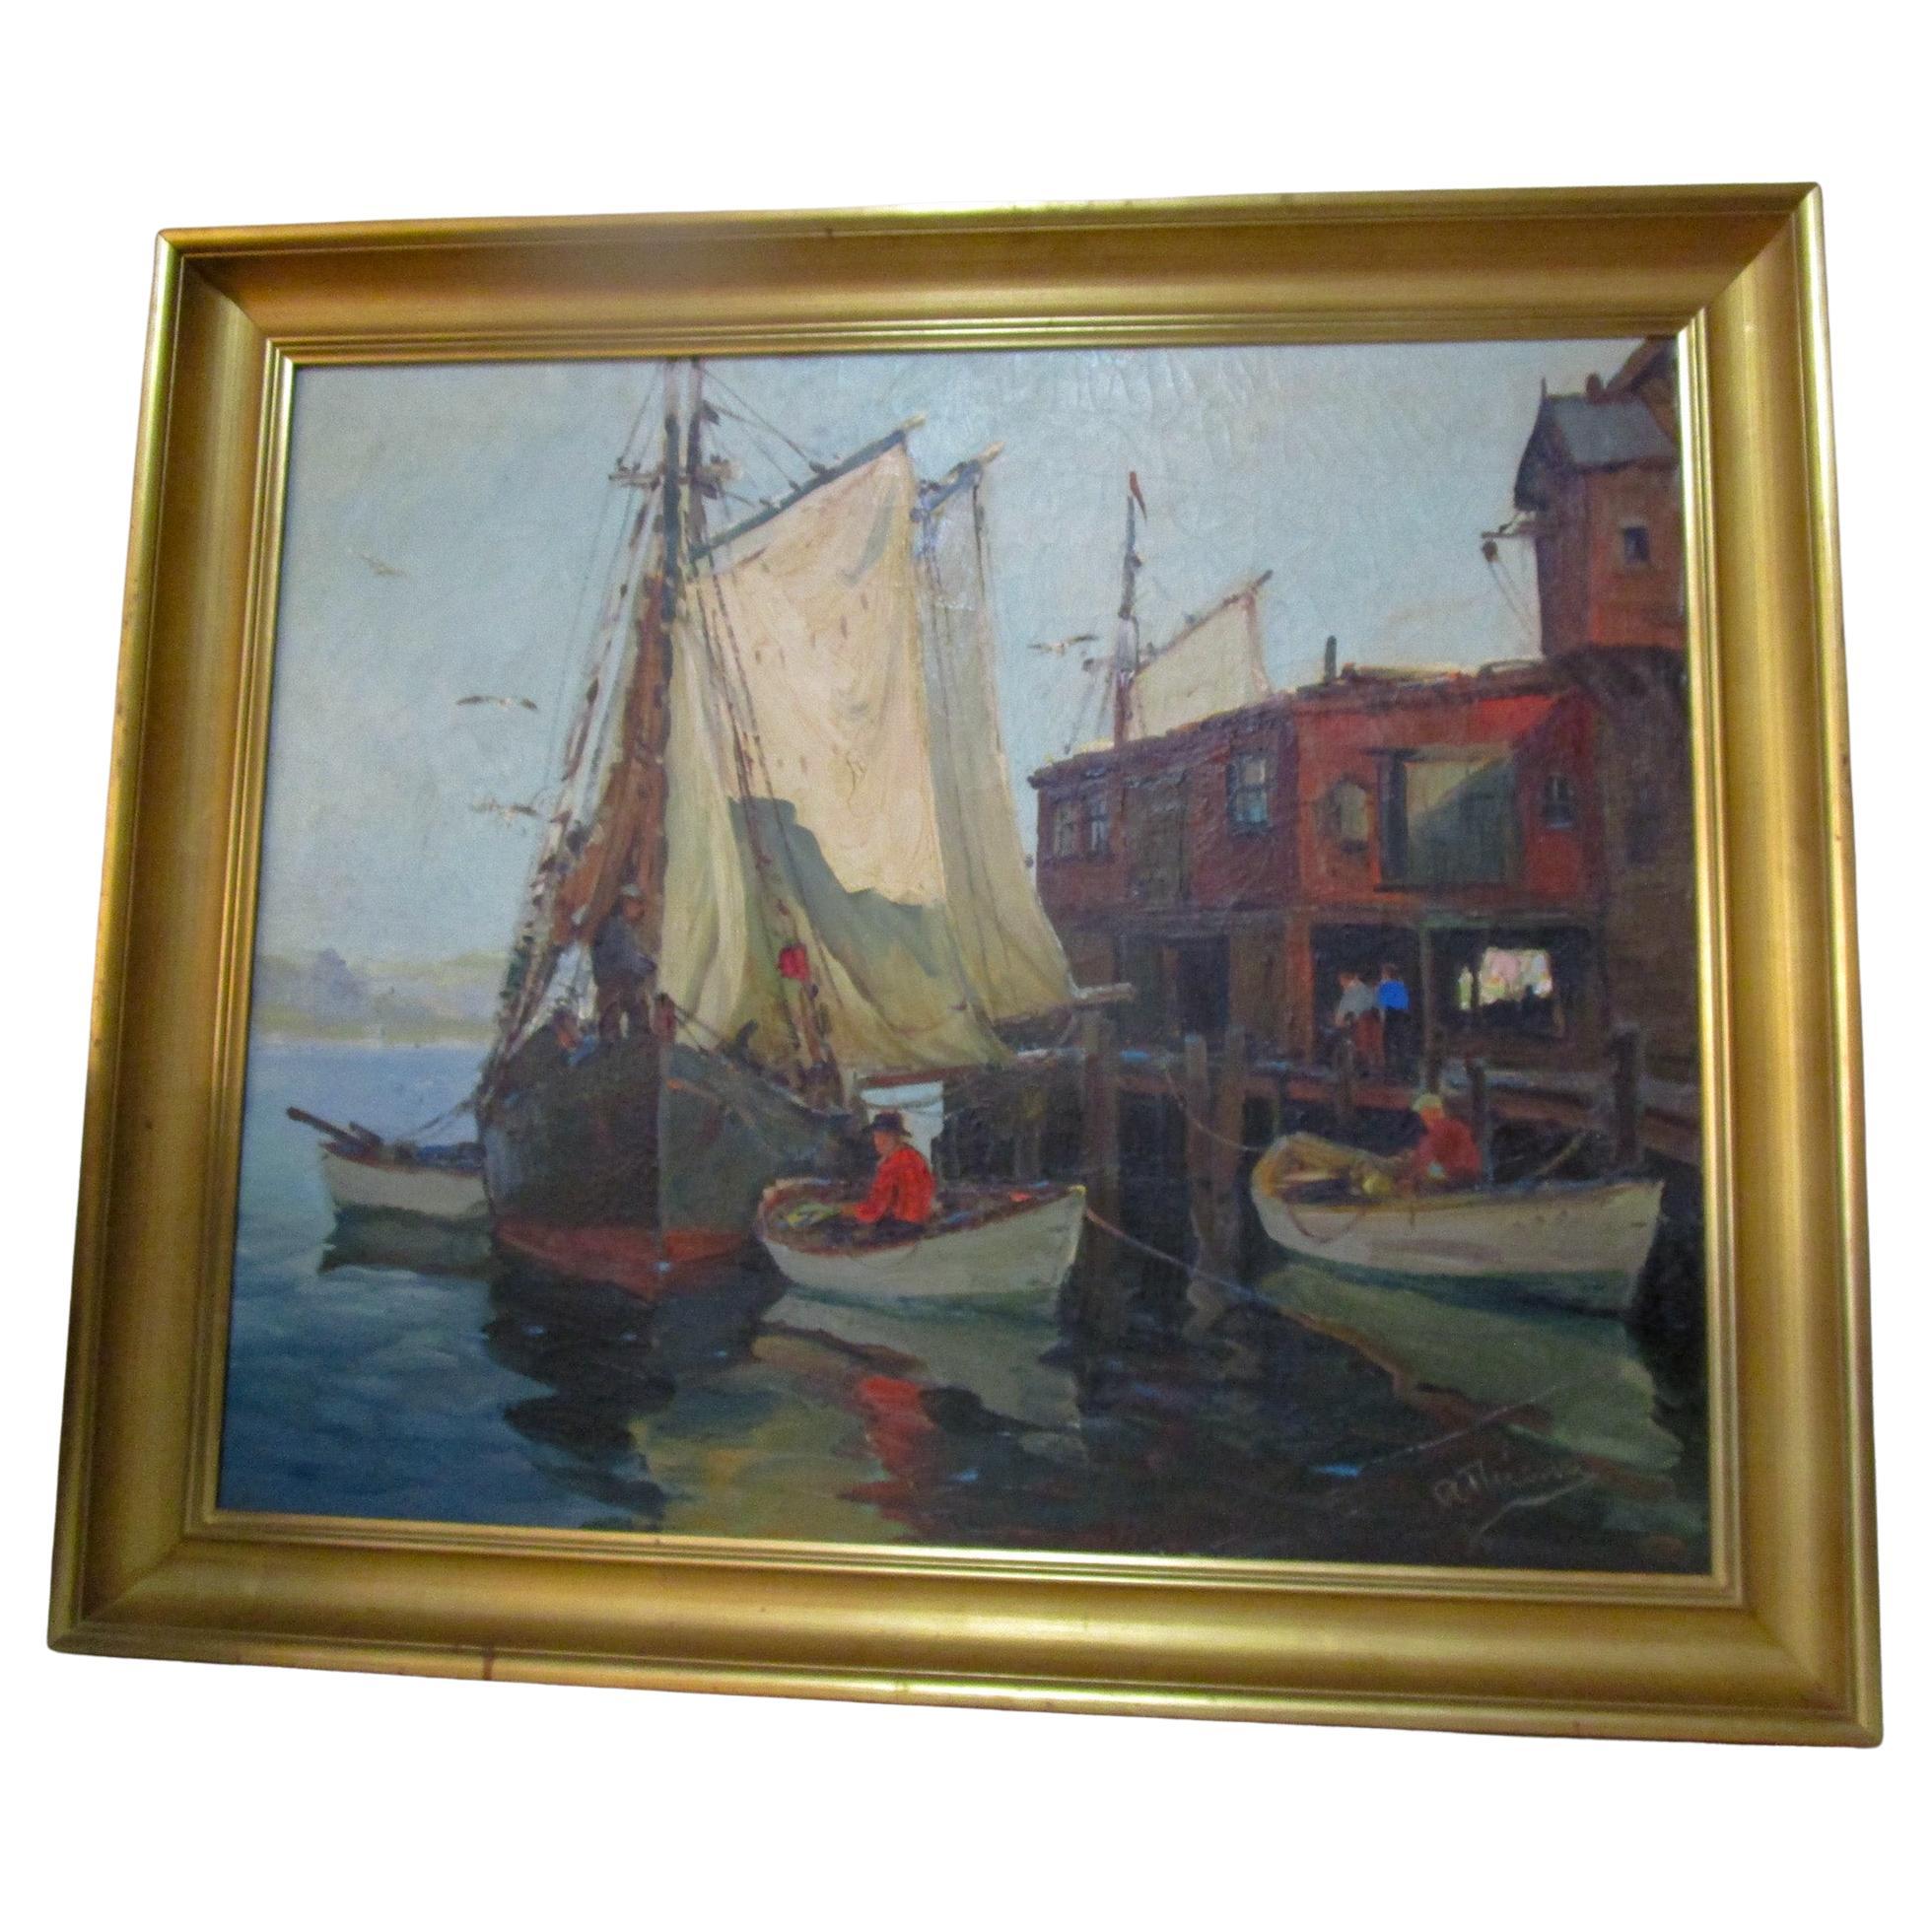 American Impressionist New England Harbor Scene Painting "Sails Up" by A. Thieme For Sale